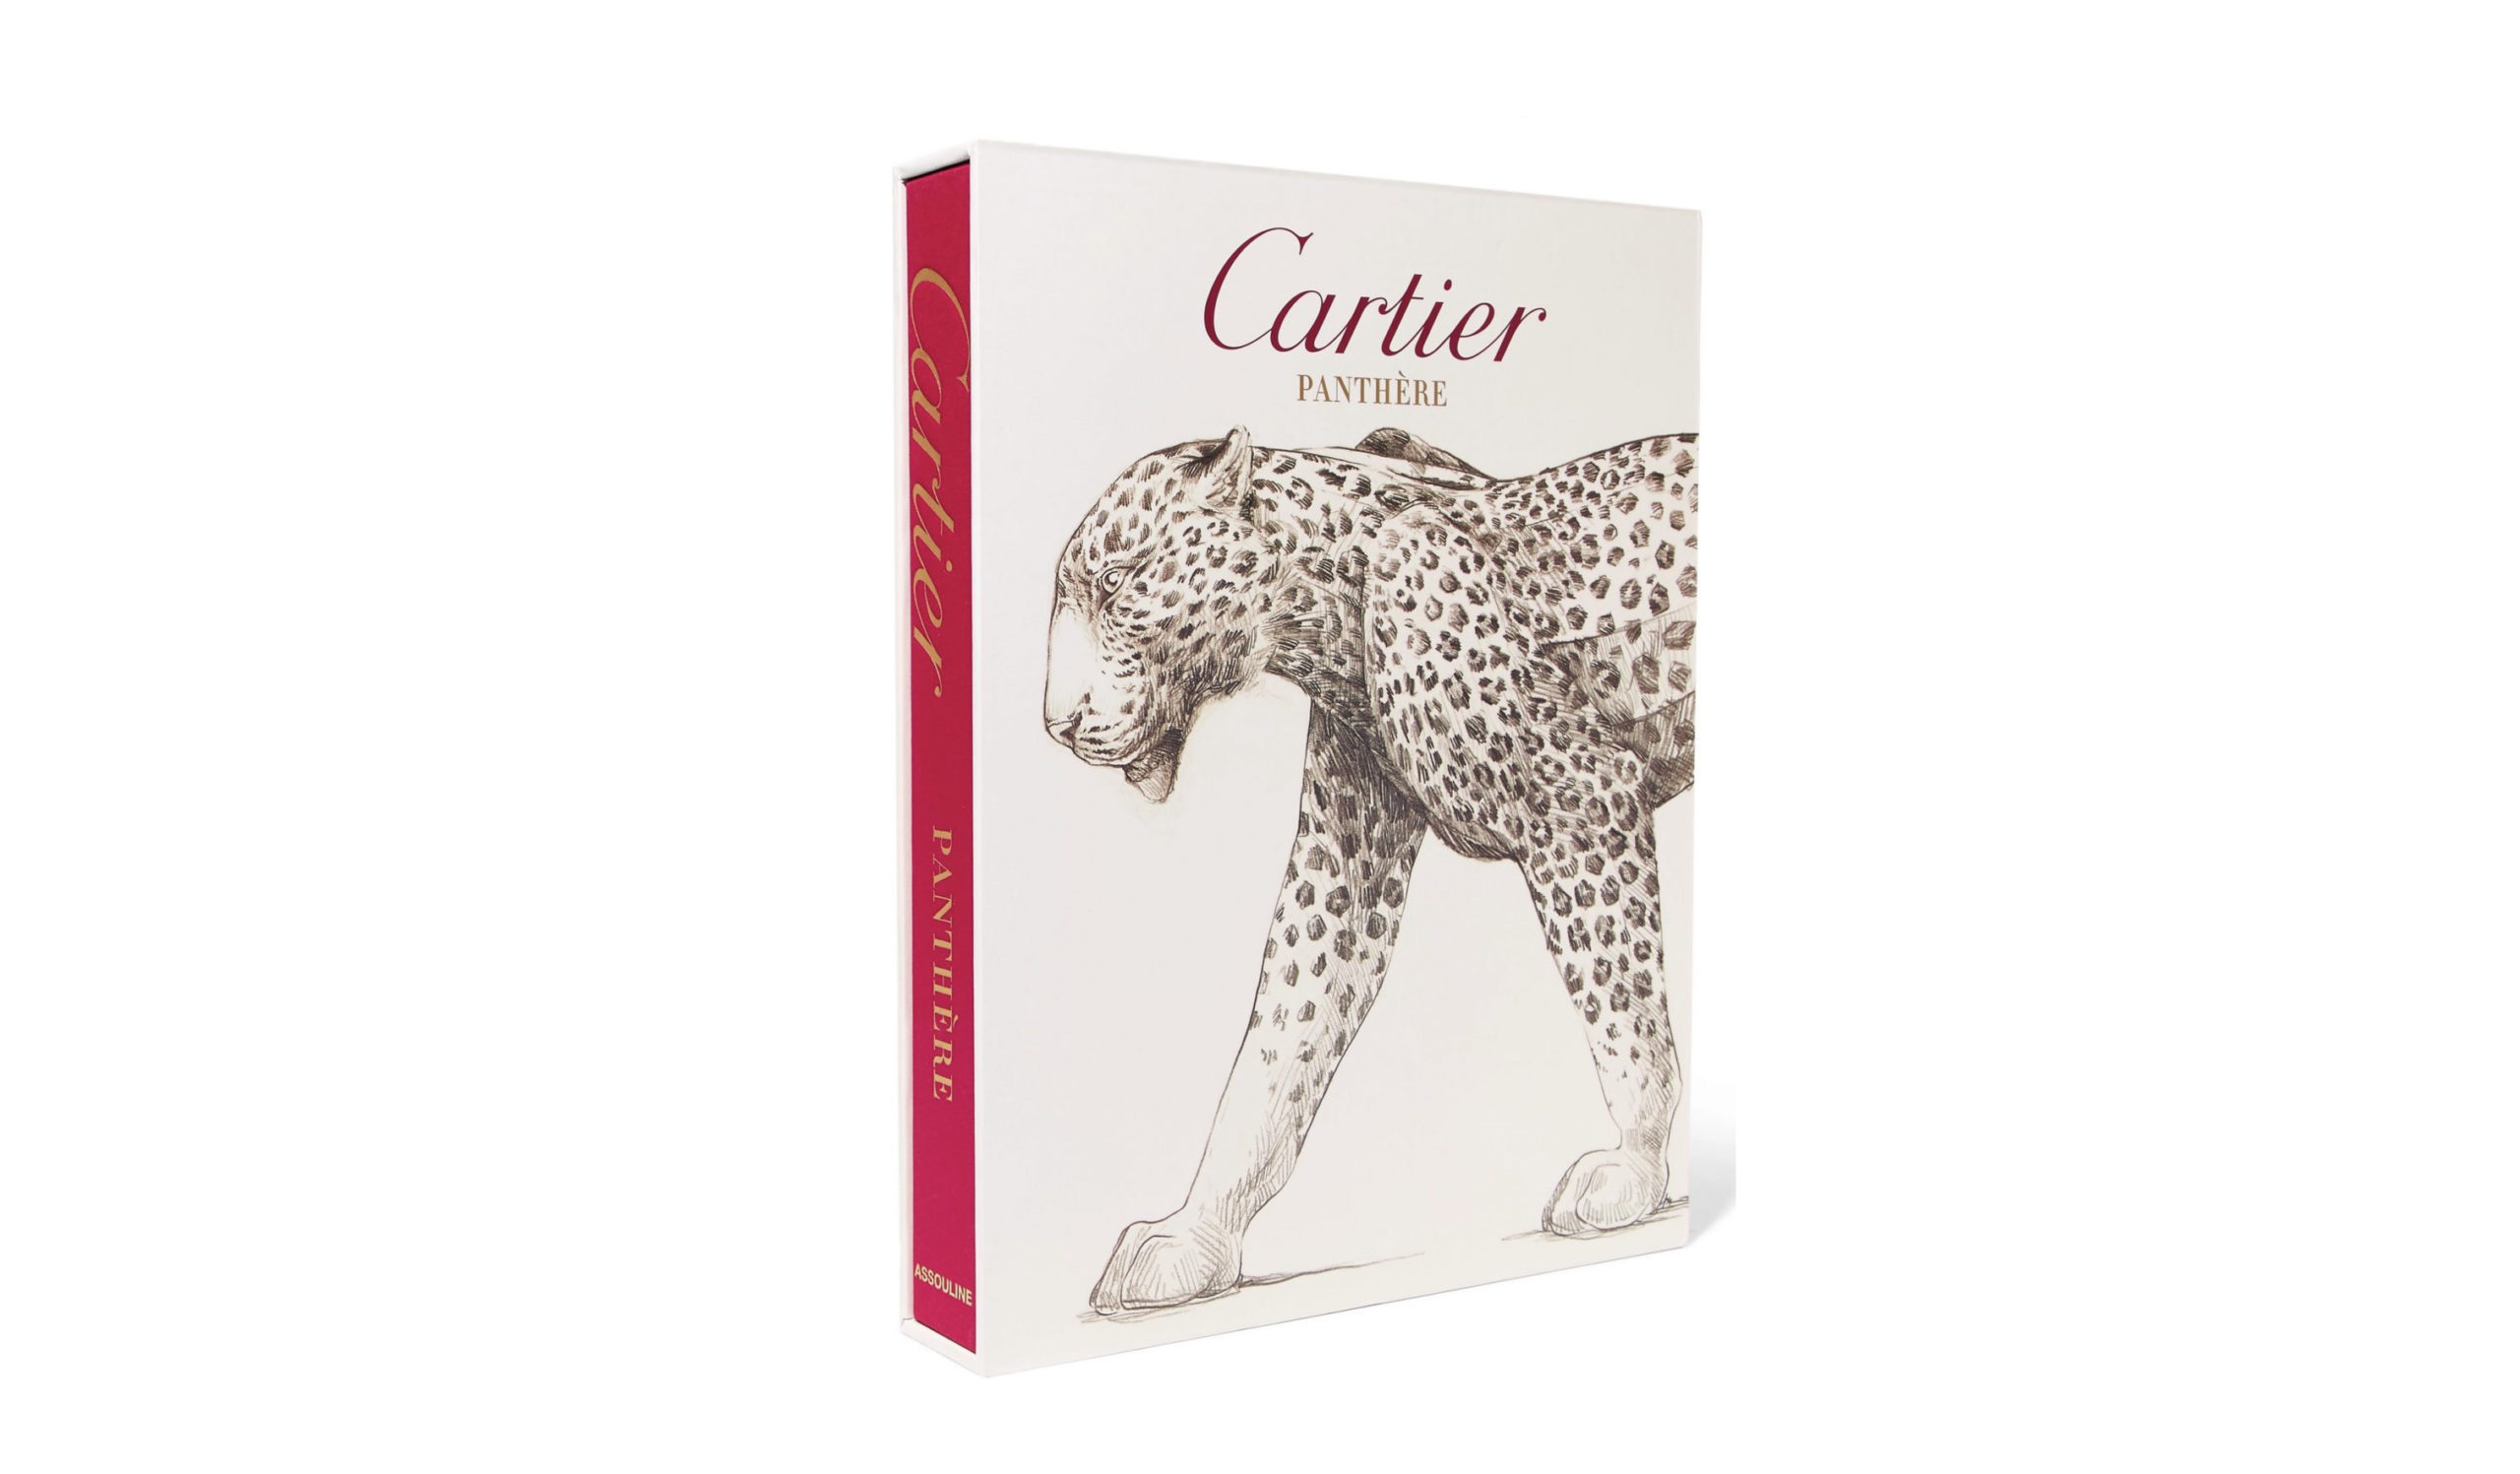 Cartier Panthère (Coffee table book 